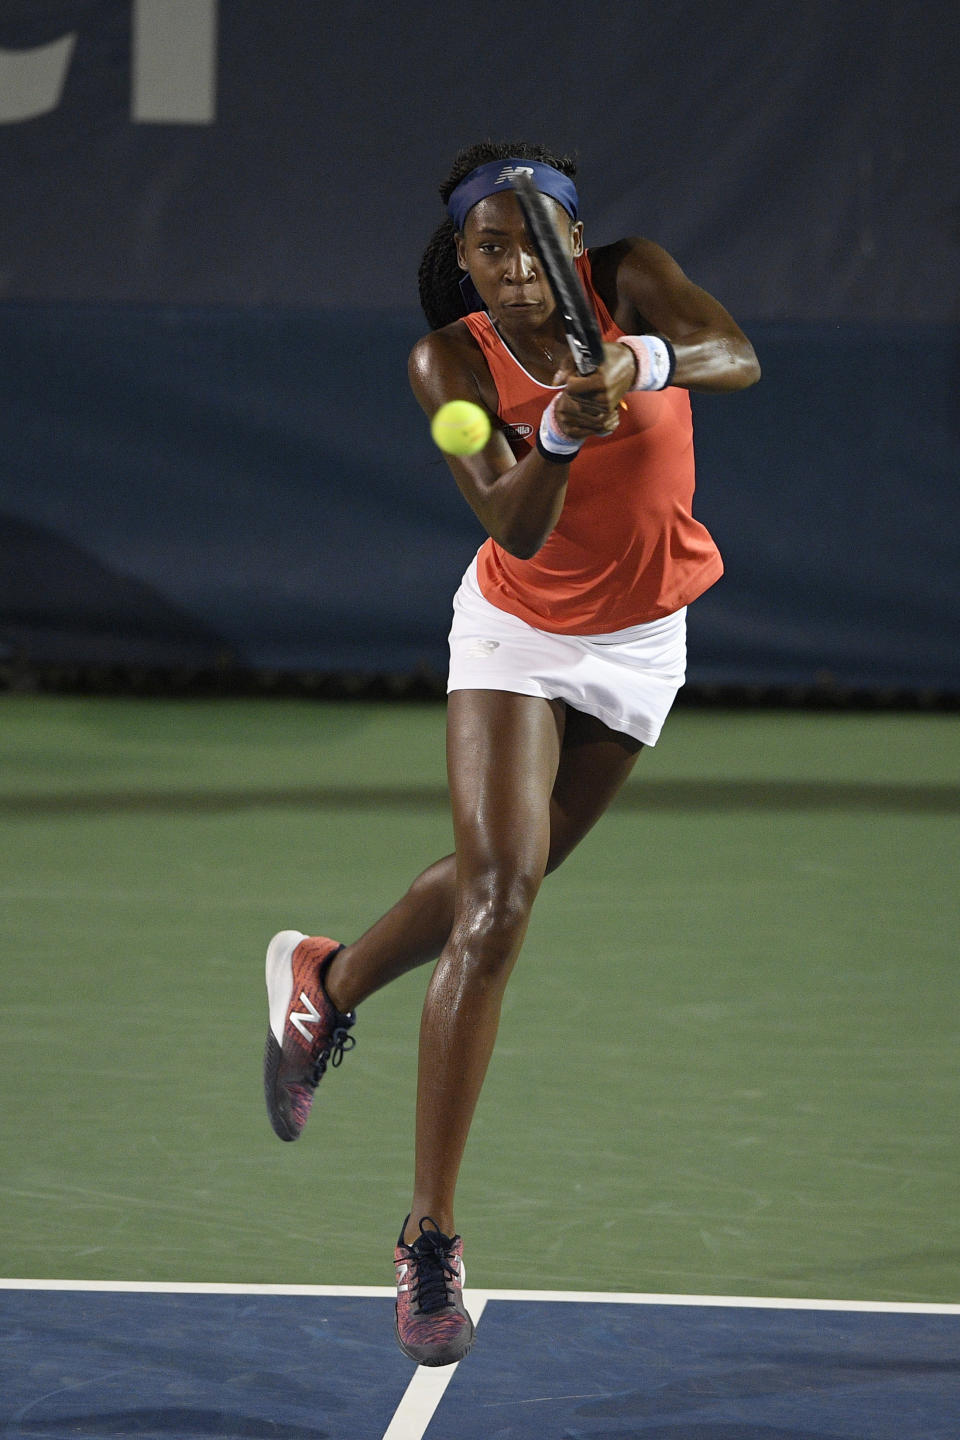 Cori "Coco" Gauff returns the ball as she and Catherine McNally played a doubles match against Anna Kalinskaya, of Russia, and Miyu Kato, of Japan, in the Citi Open tennis tournament, Friday, Aug. 2, 2019, in Washington. (AP Photo/Nick Wass)